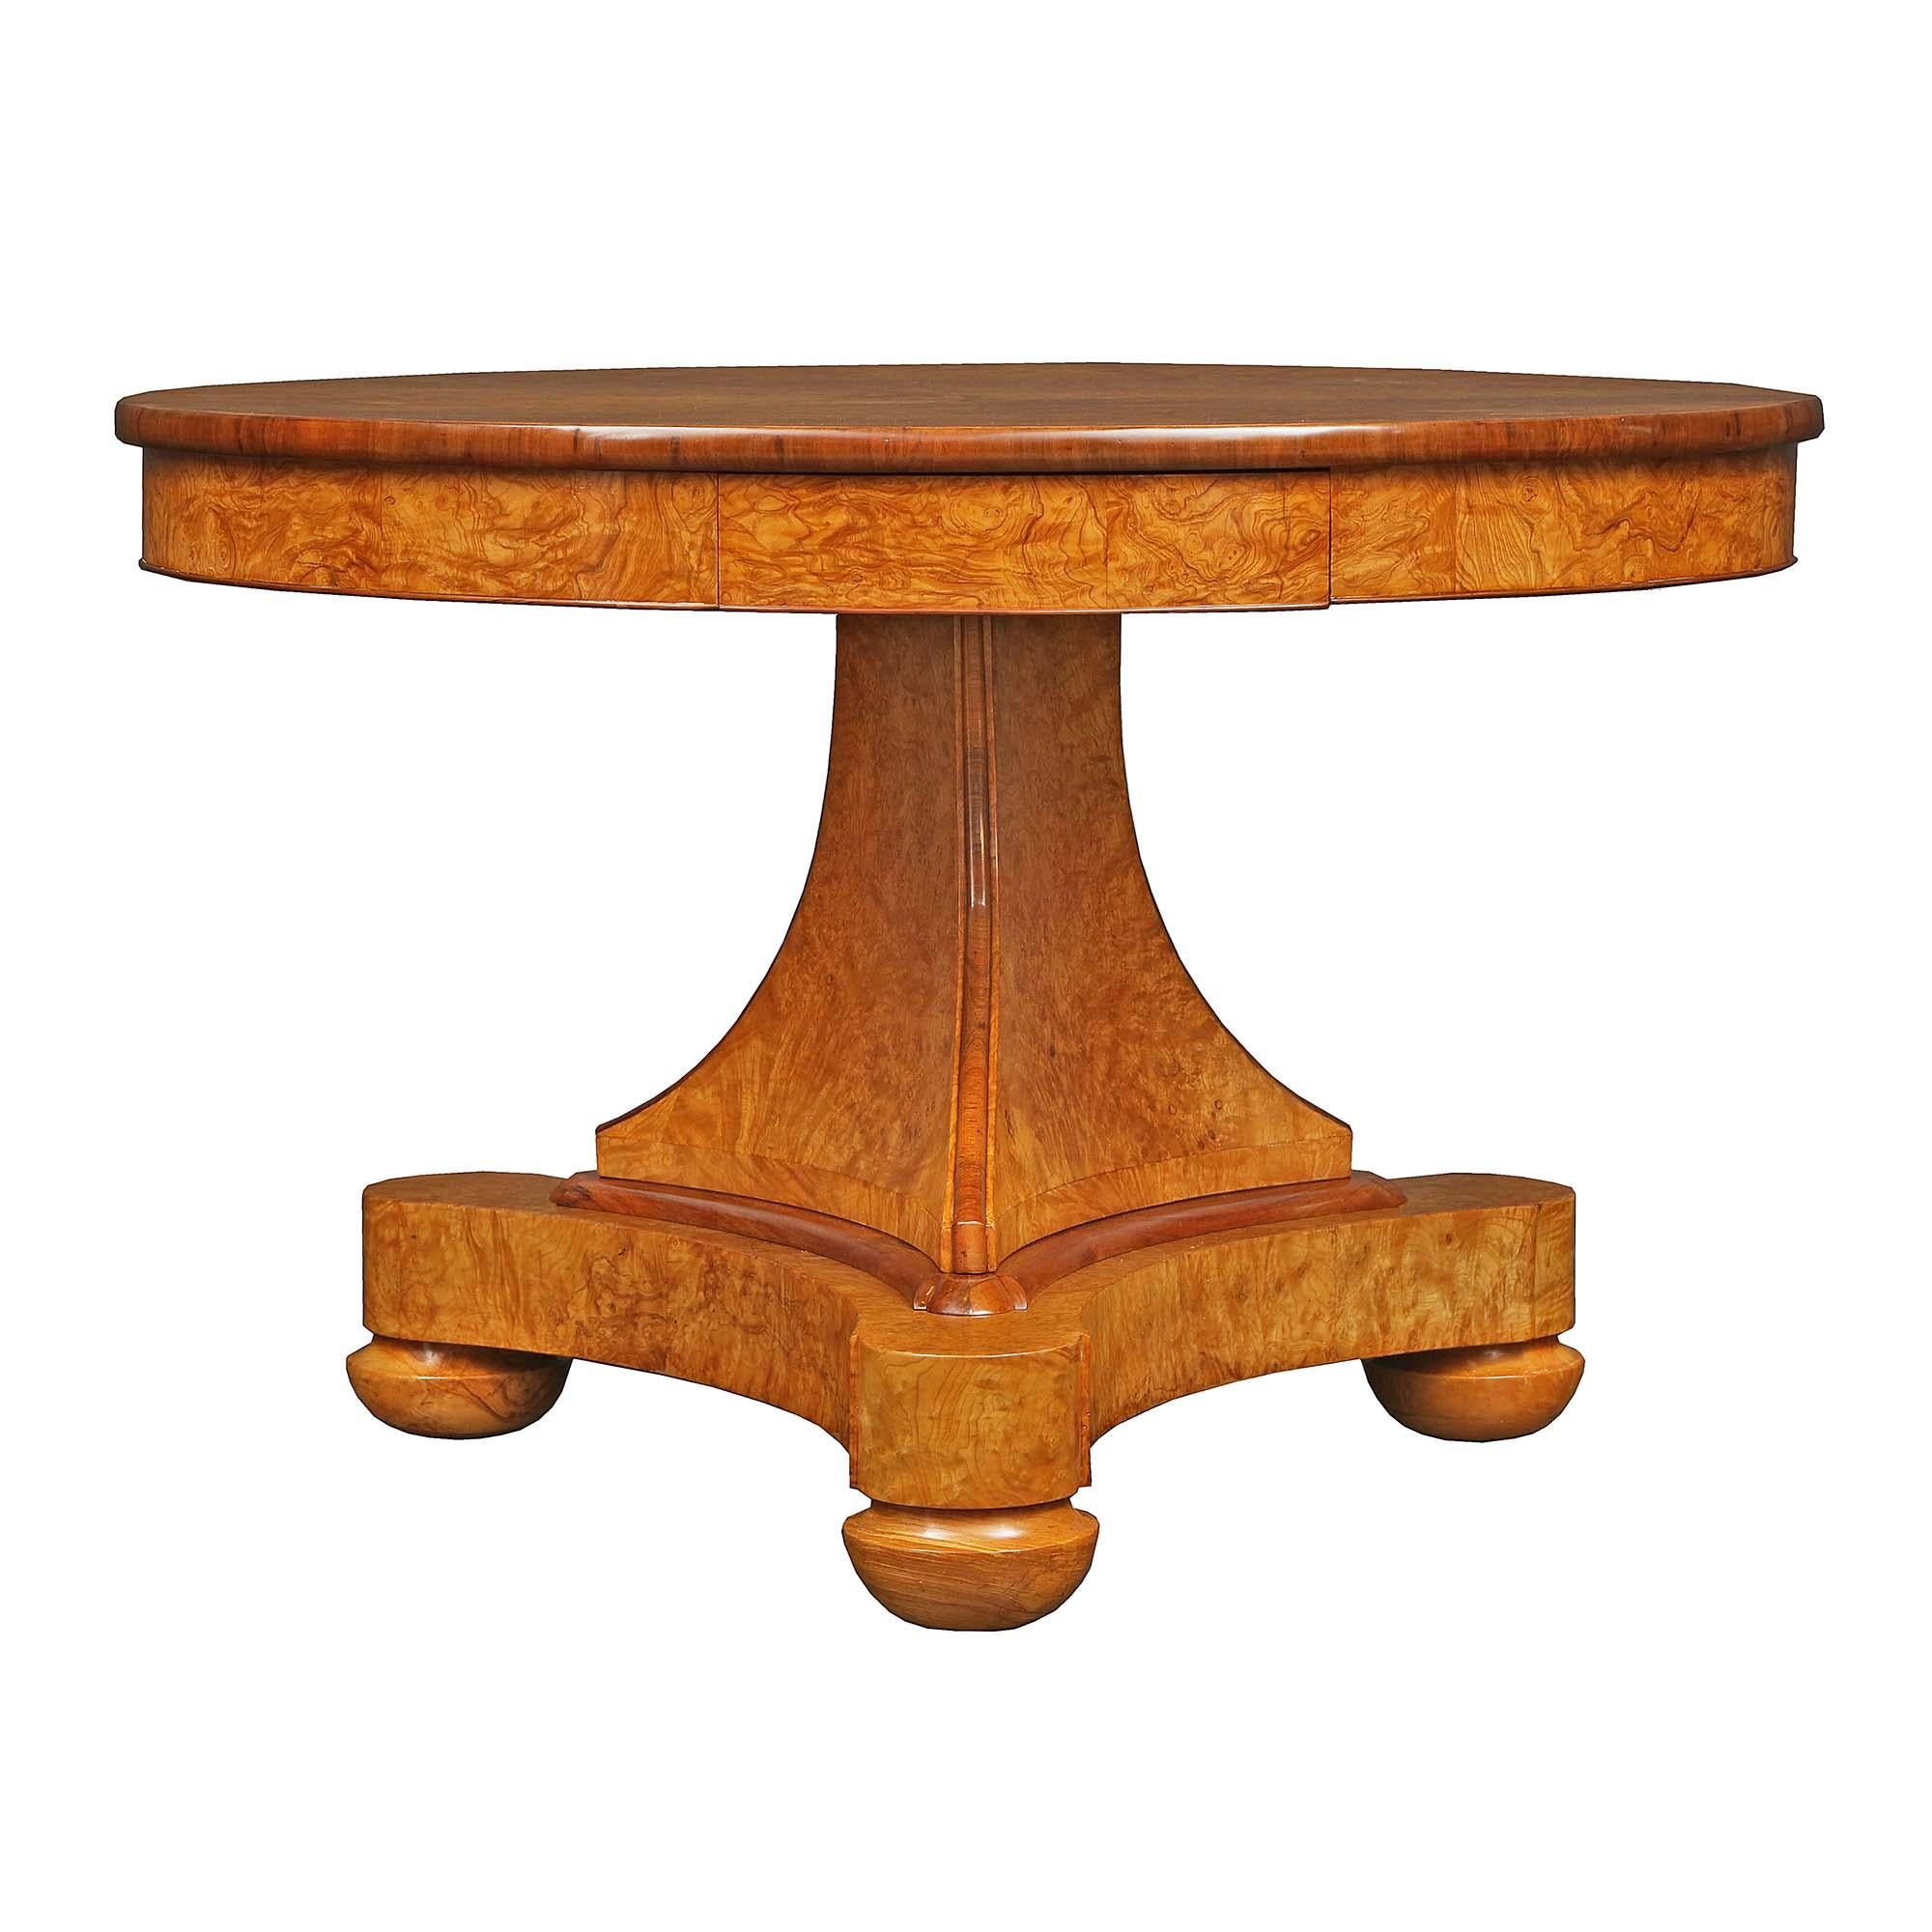 A very attractive French 19th century Charles X st. burl walnut center table. The table is raised on bun feet below a triangular base with concave sides. A central triangular supports the circular top. At the full apron are two drawers below the